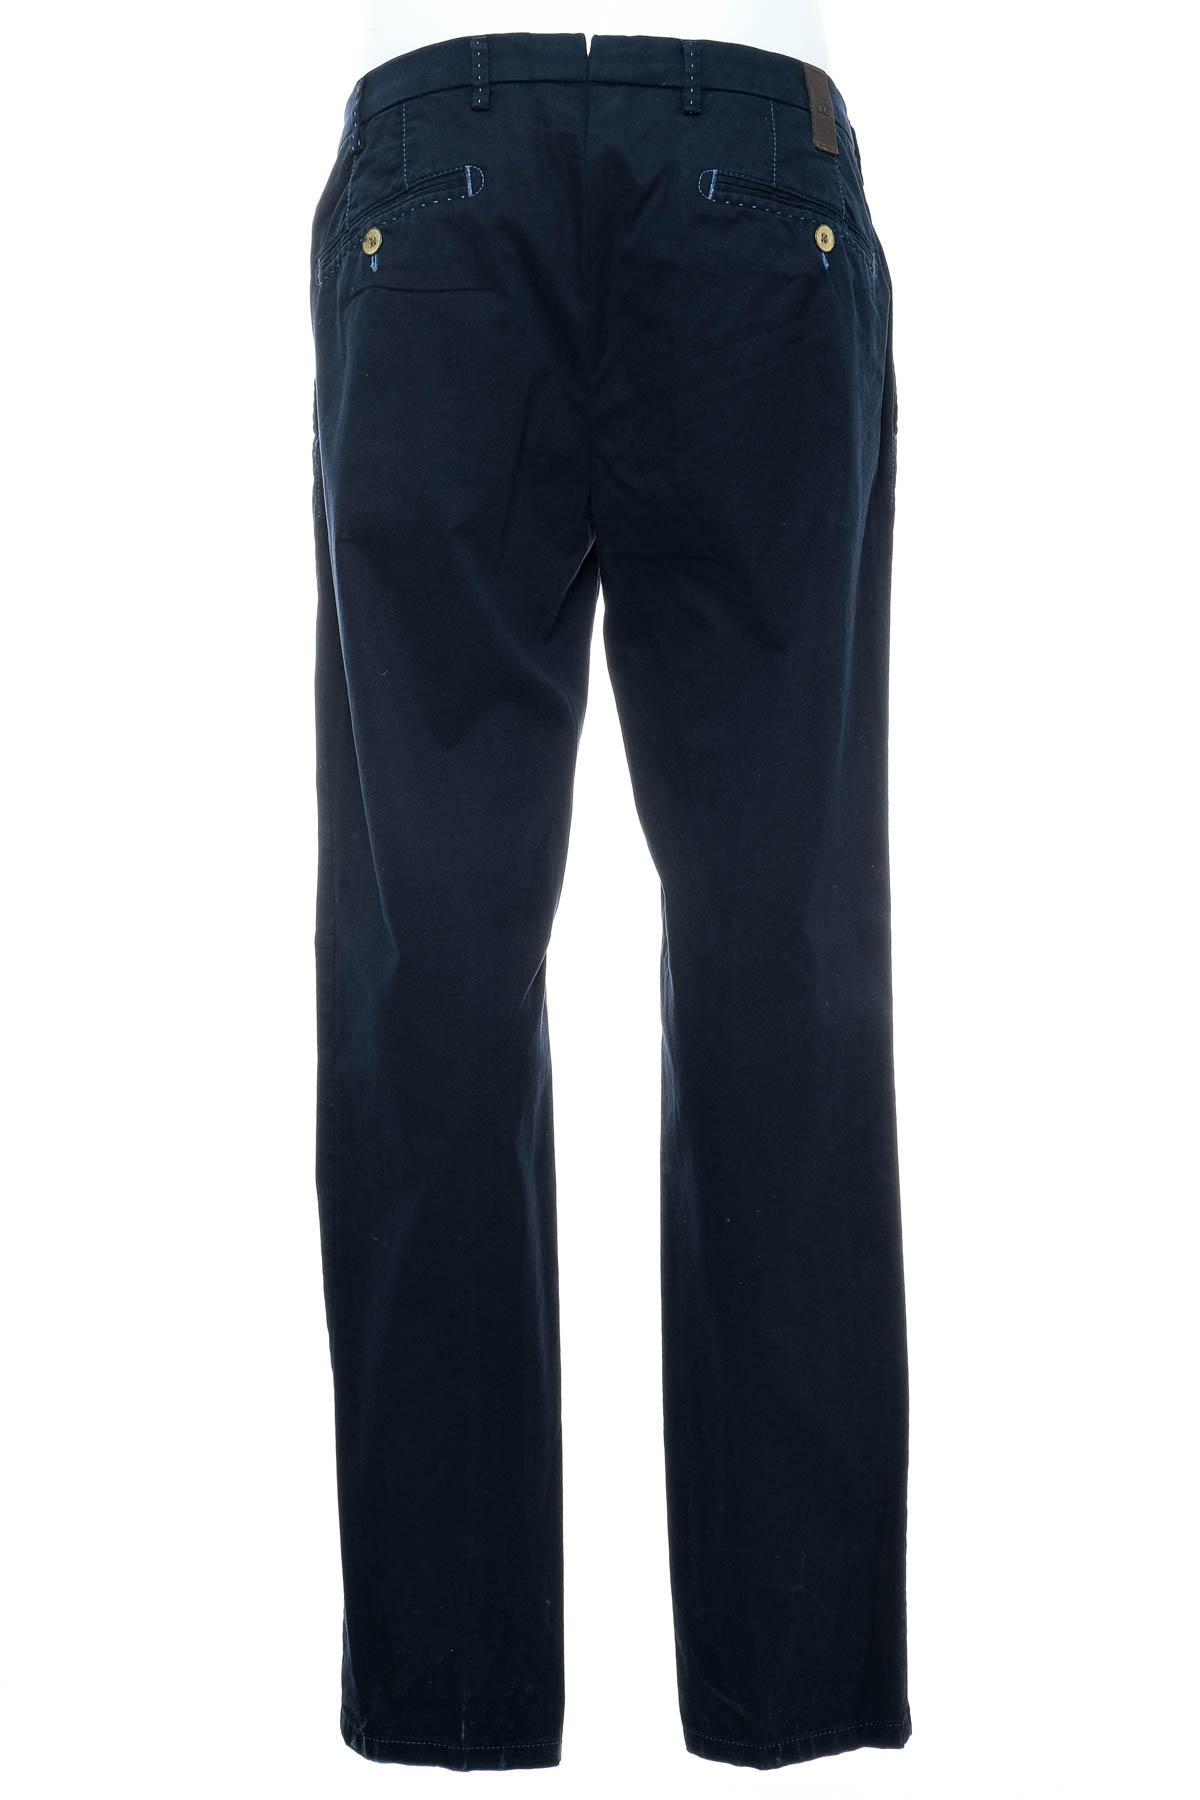 Men's trousers - MMX Germany - 1